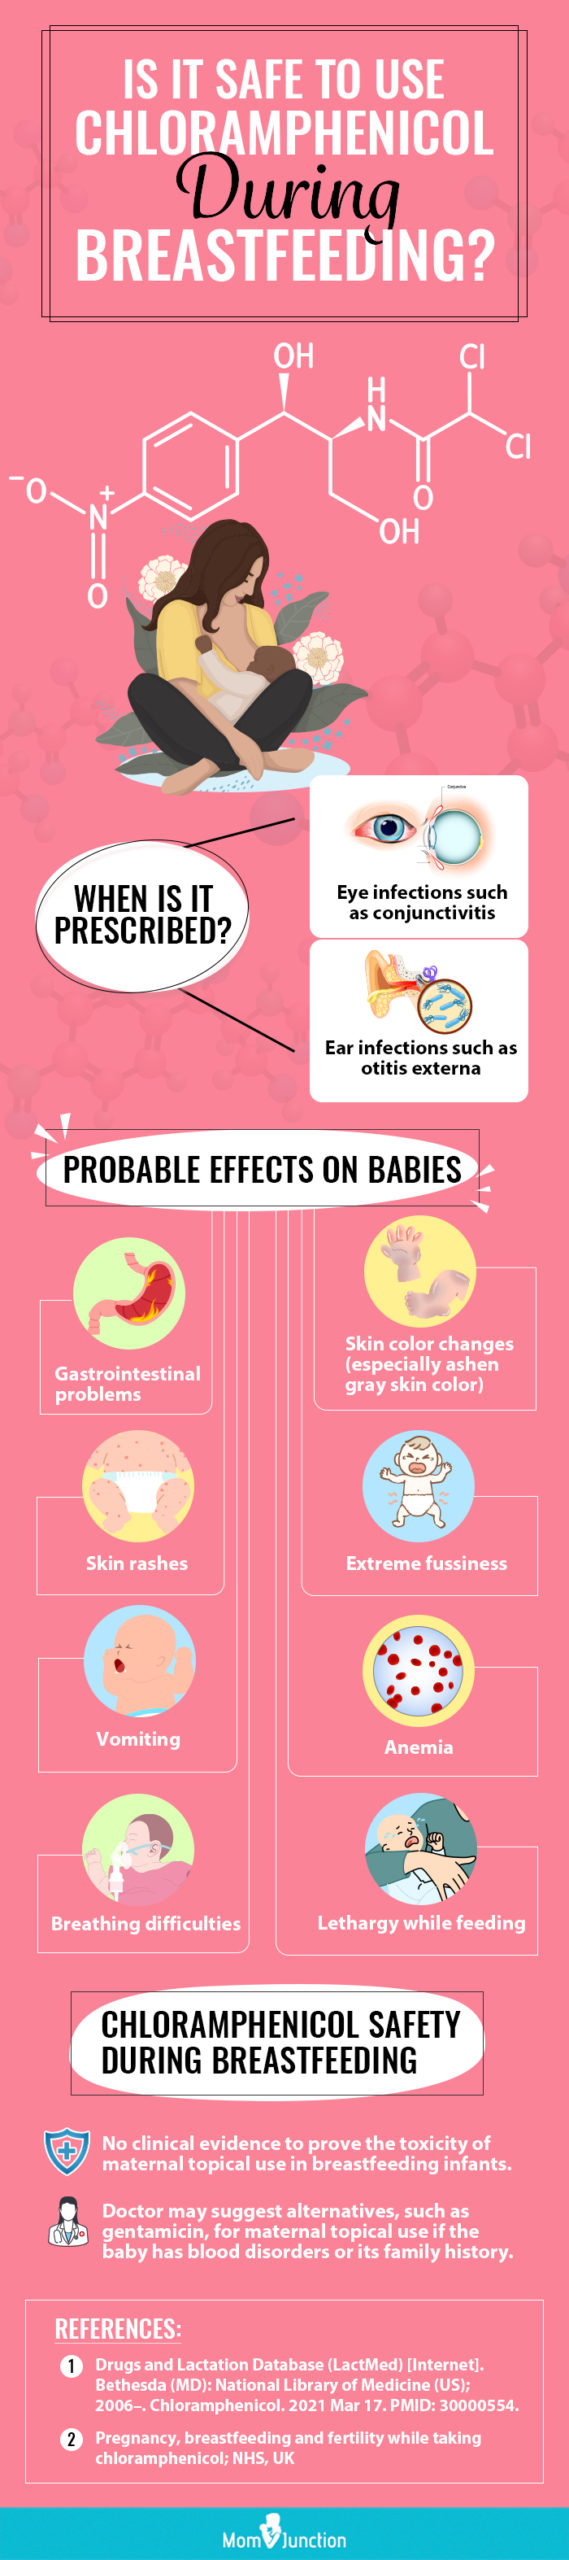 is it safe to use chloramphenicol during breastfeeding (infographic)